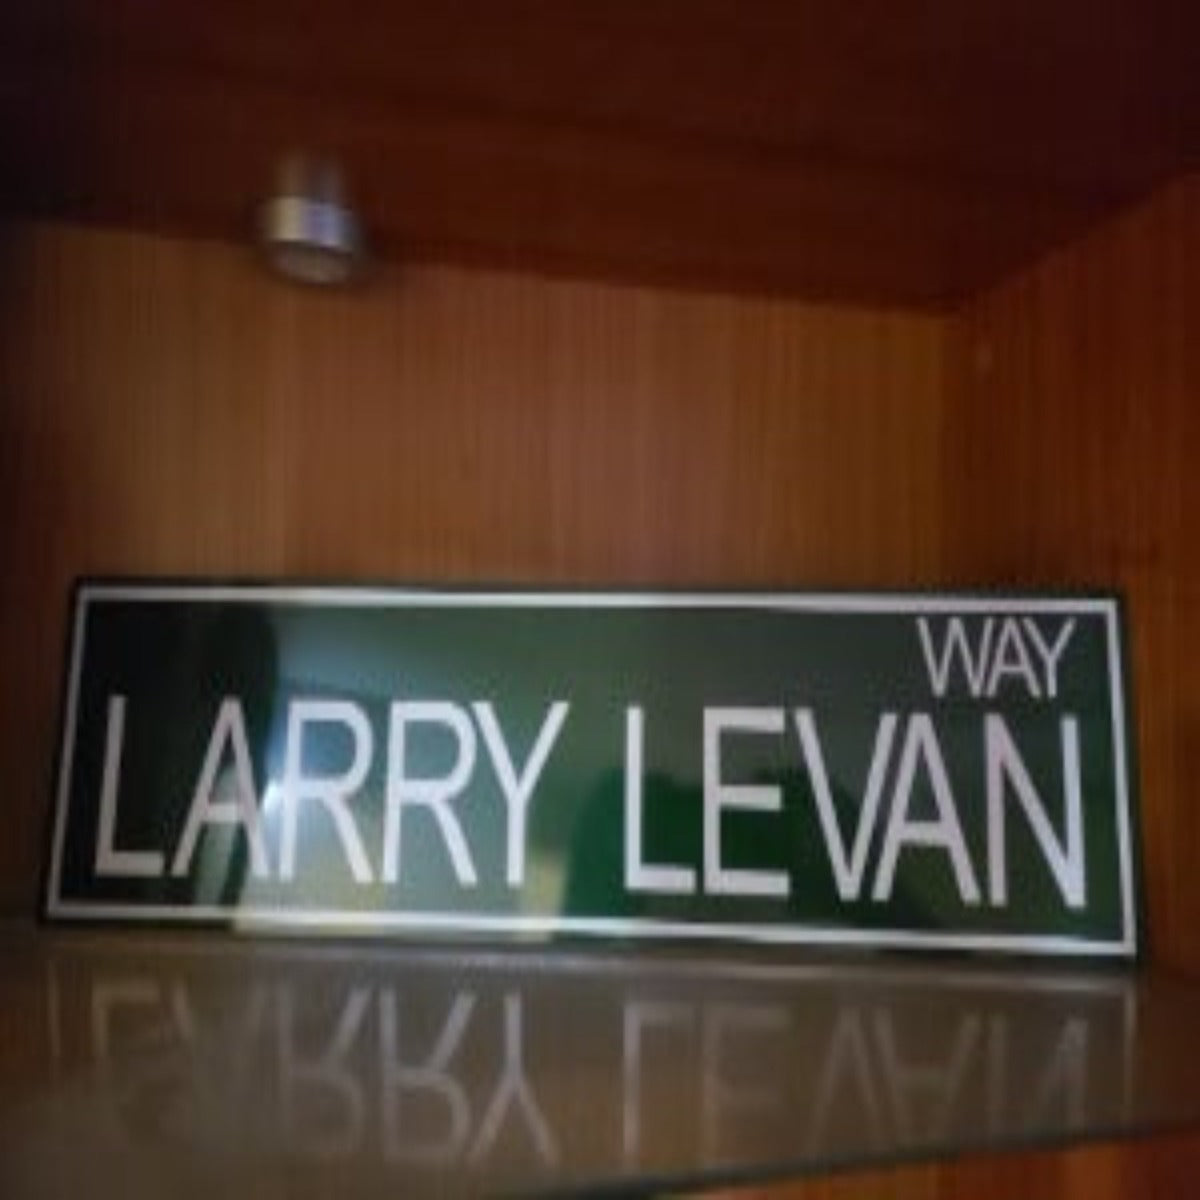 Giving the people what they need! Larry Levan Way street sign